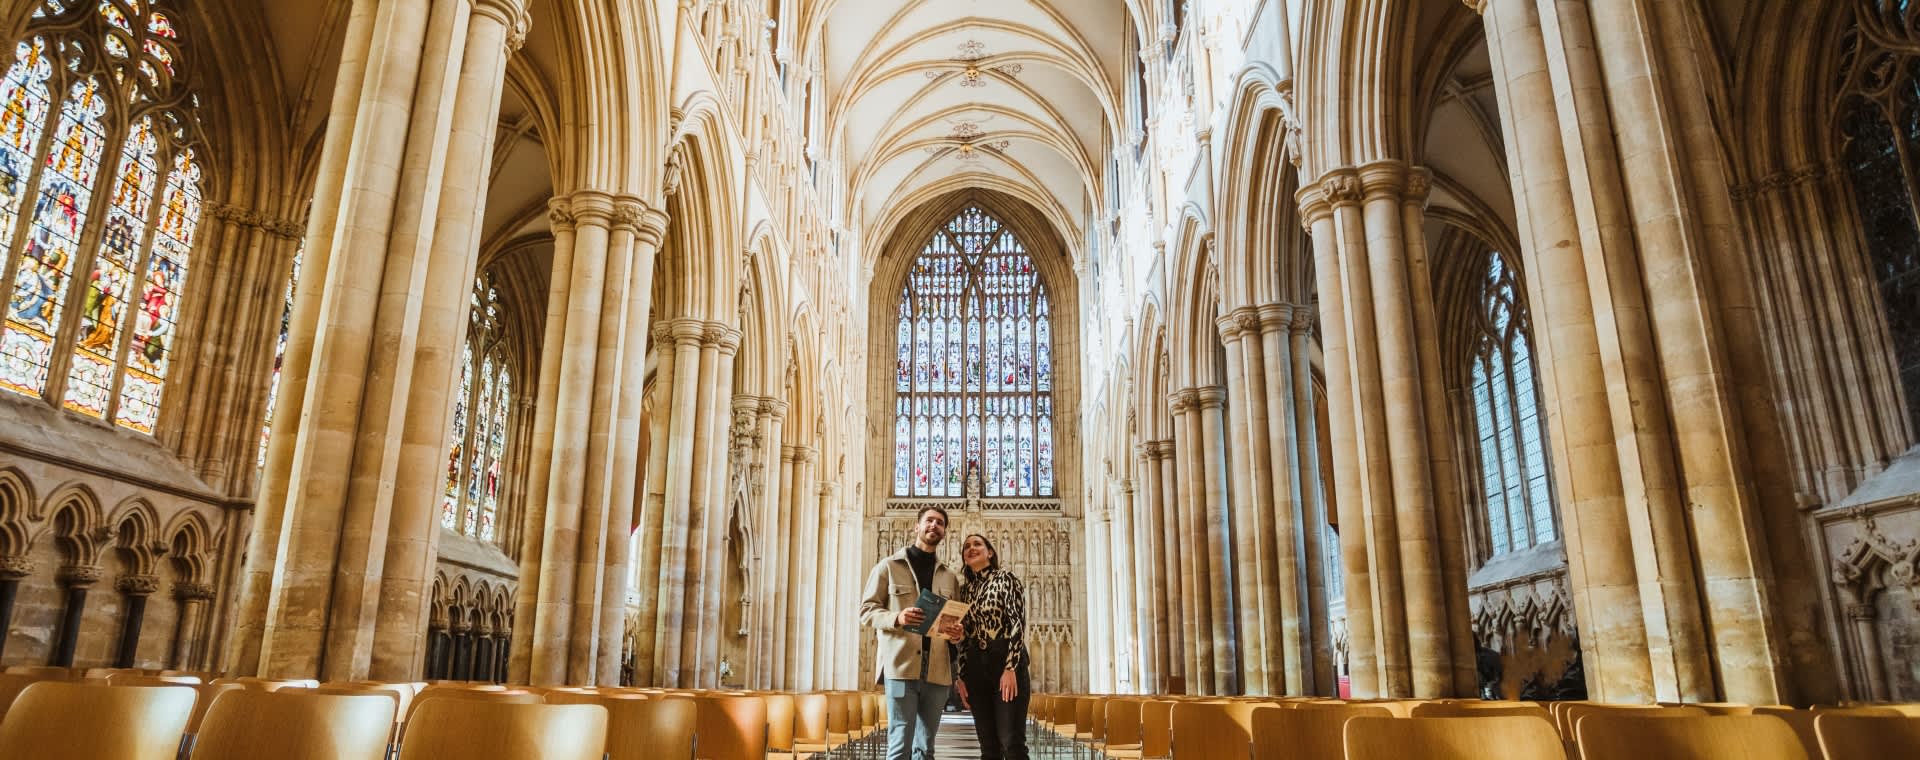 A couple admiring the architecture in Beverley Minster